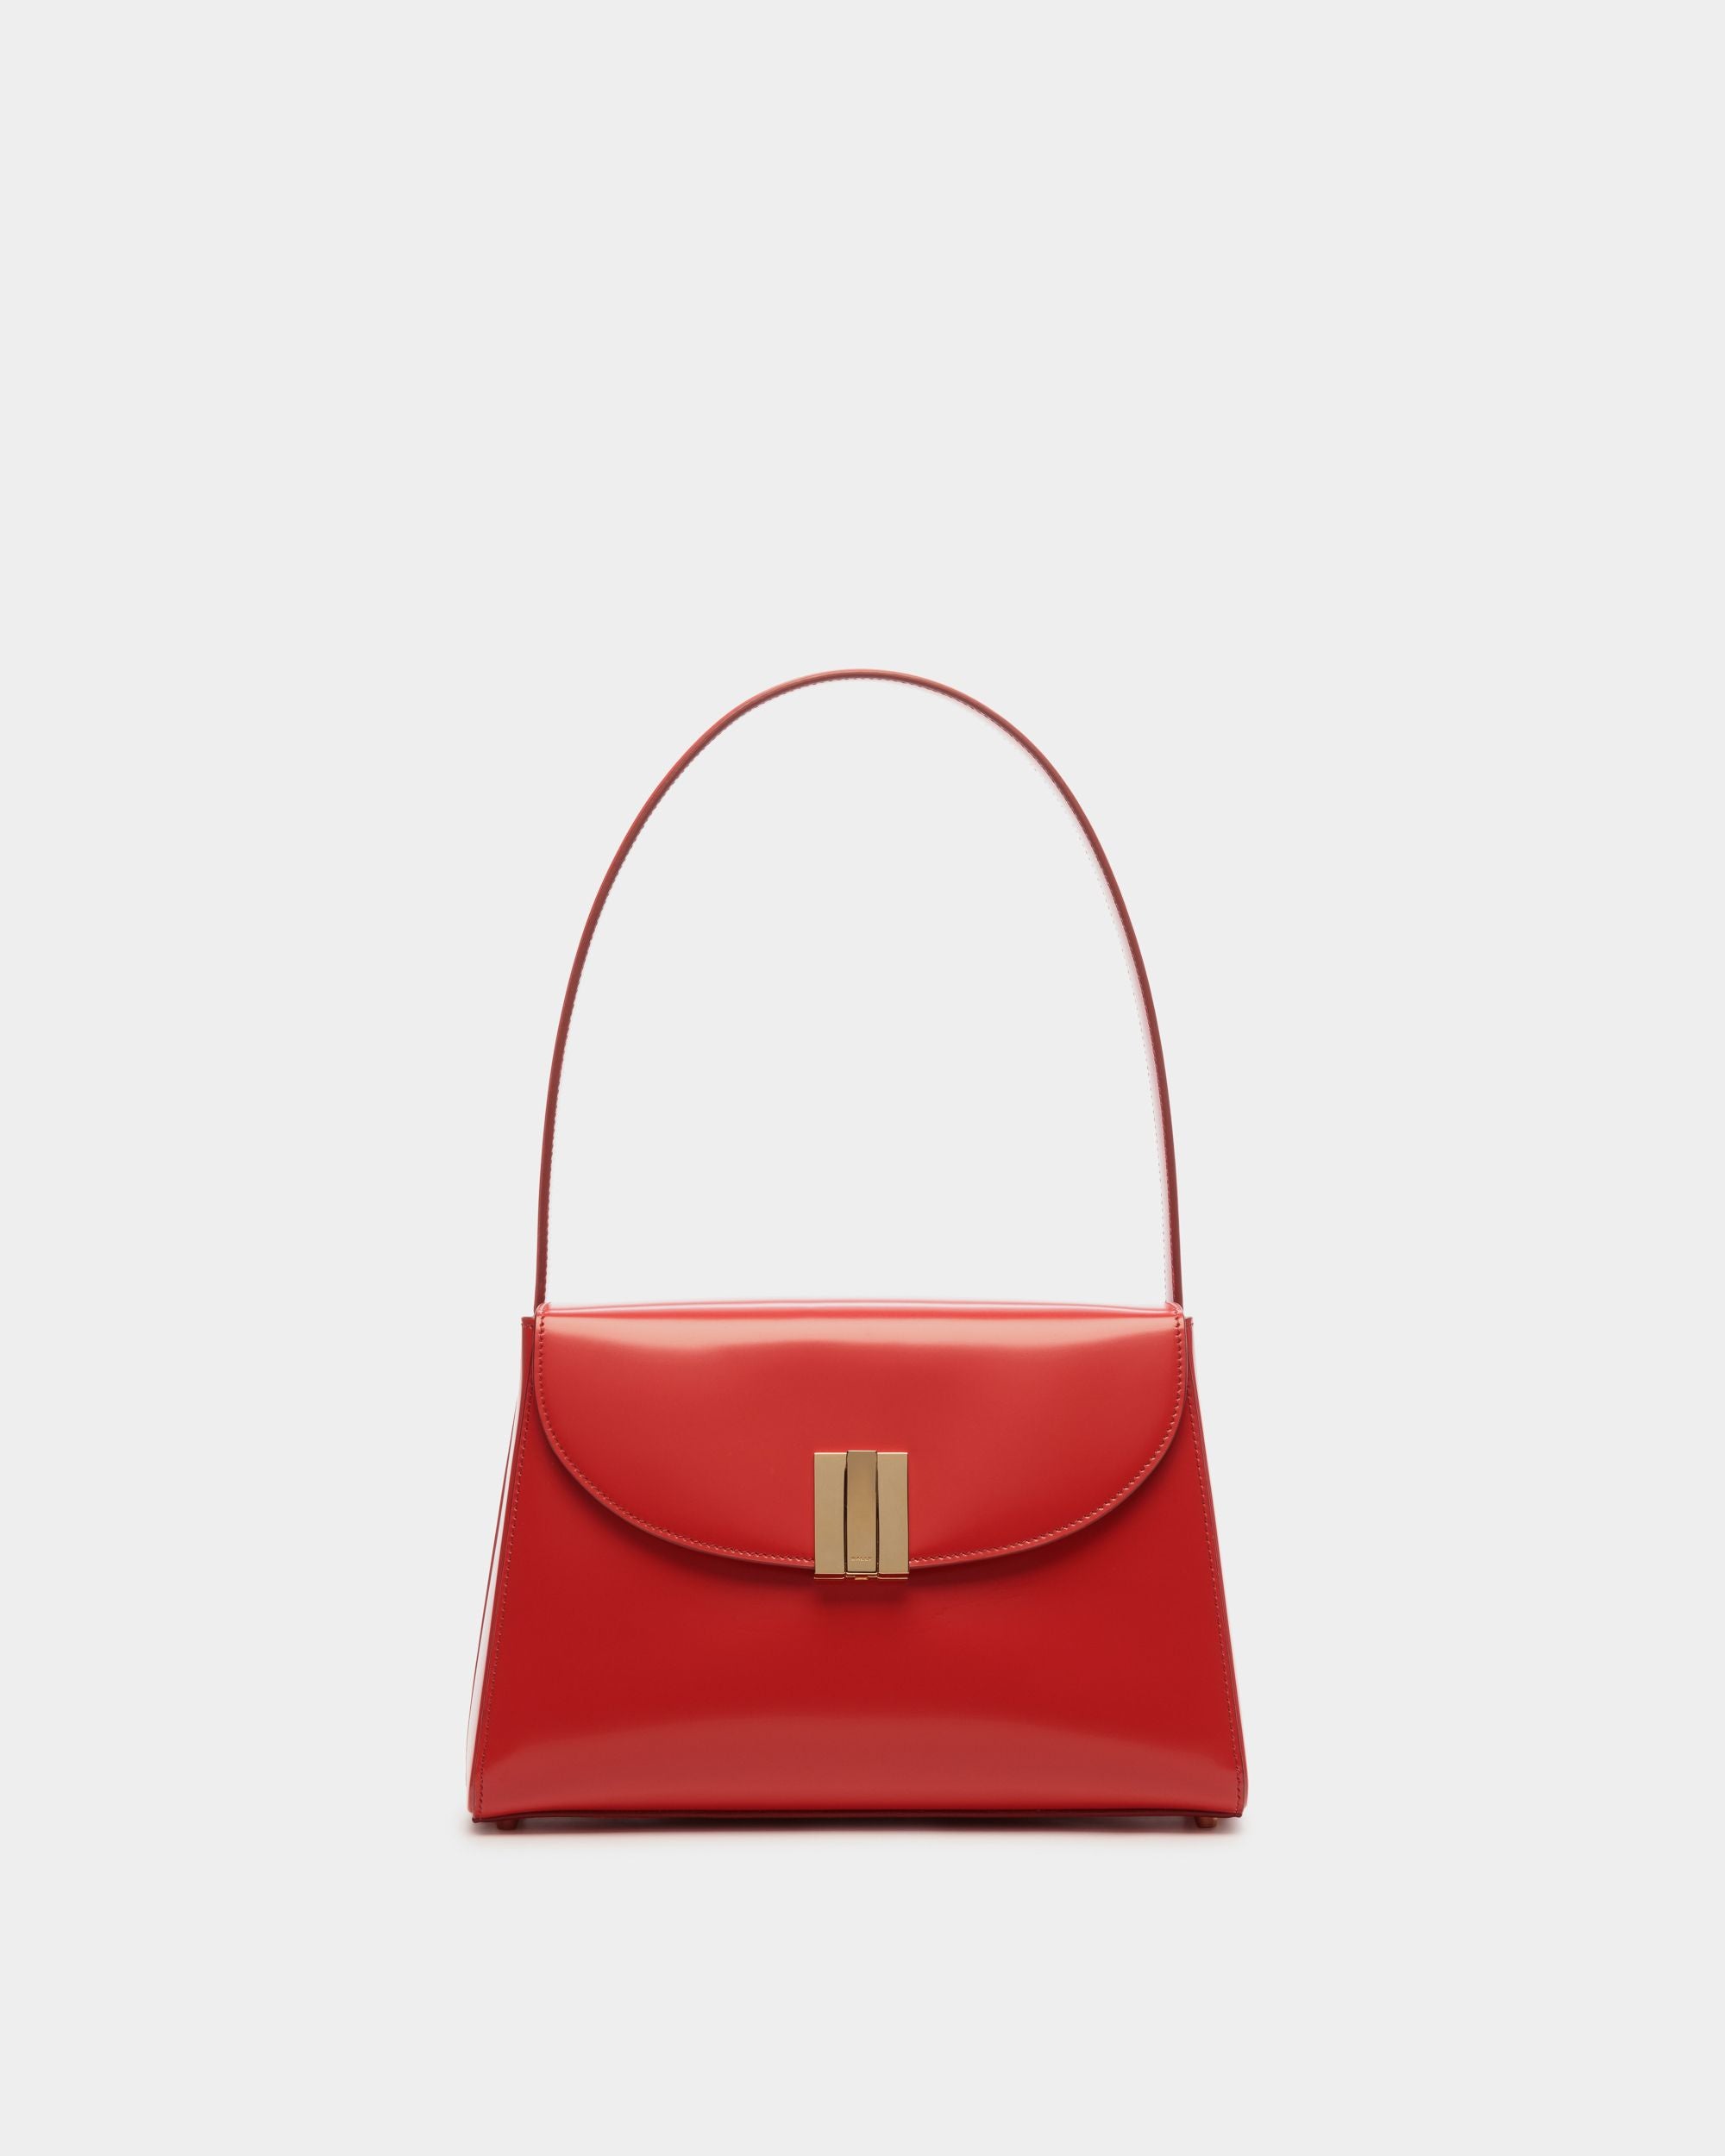 Women's Ollam Shoulder Bag in Candy Red Brushed Leather | Bally | Still Life Front